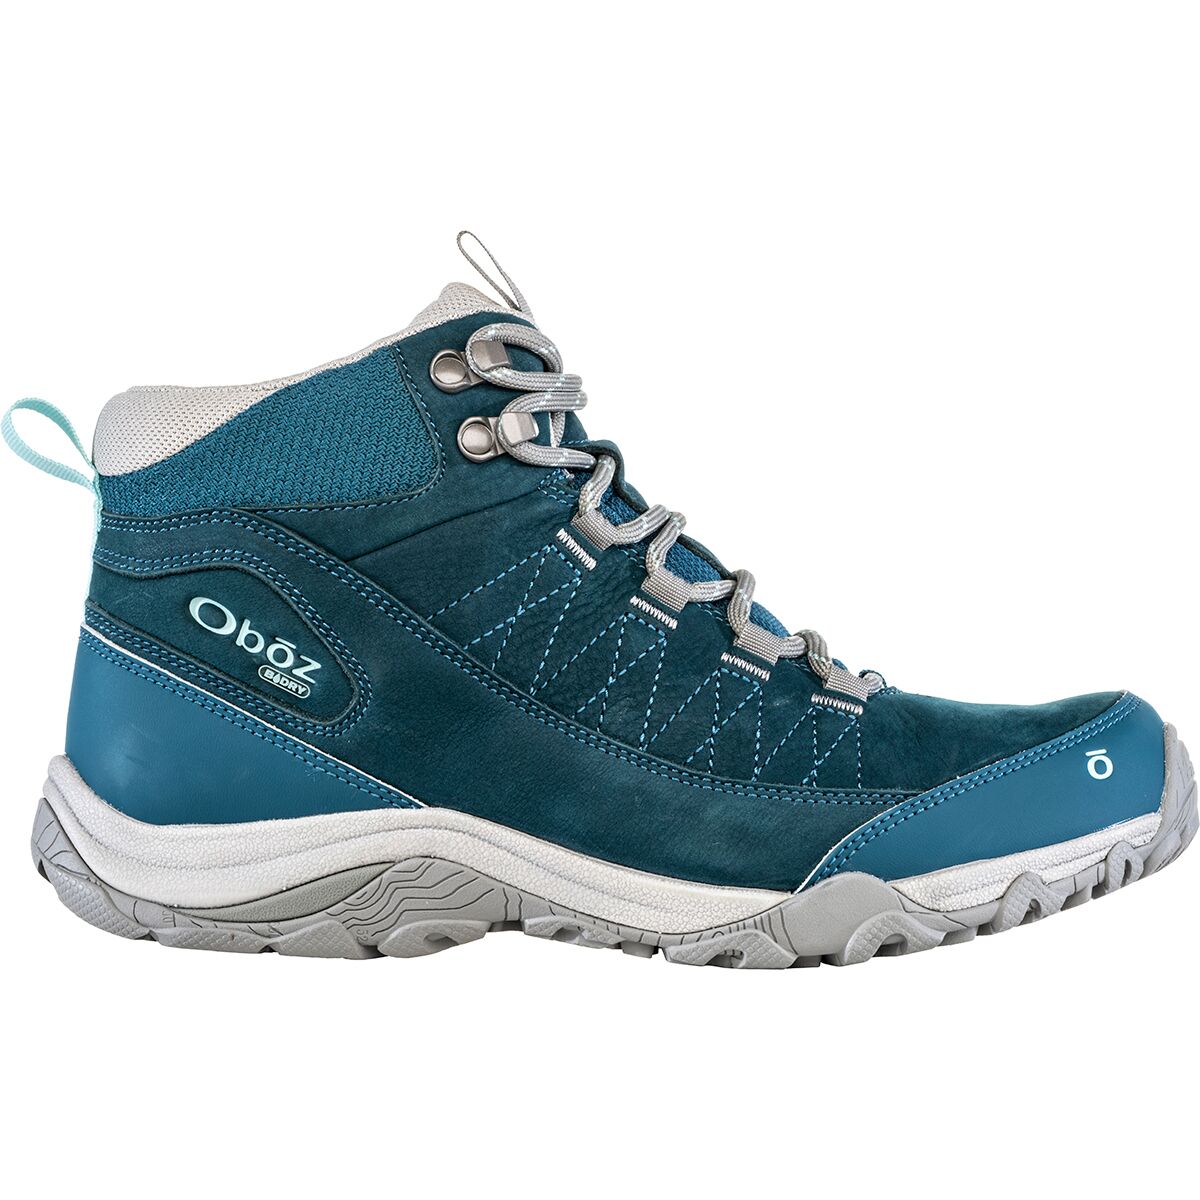 Ousel Mid B-DRY Hiking Boot - Women